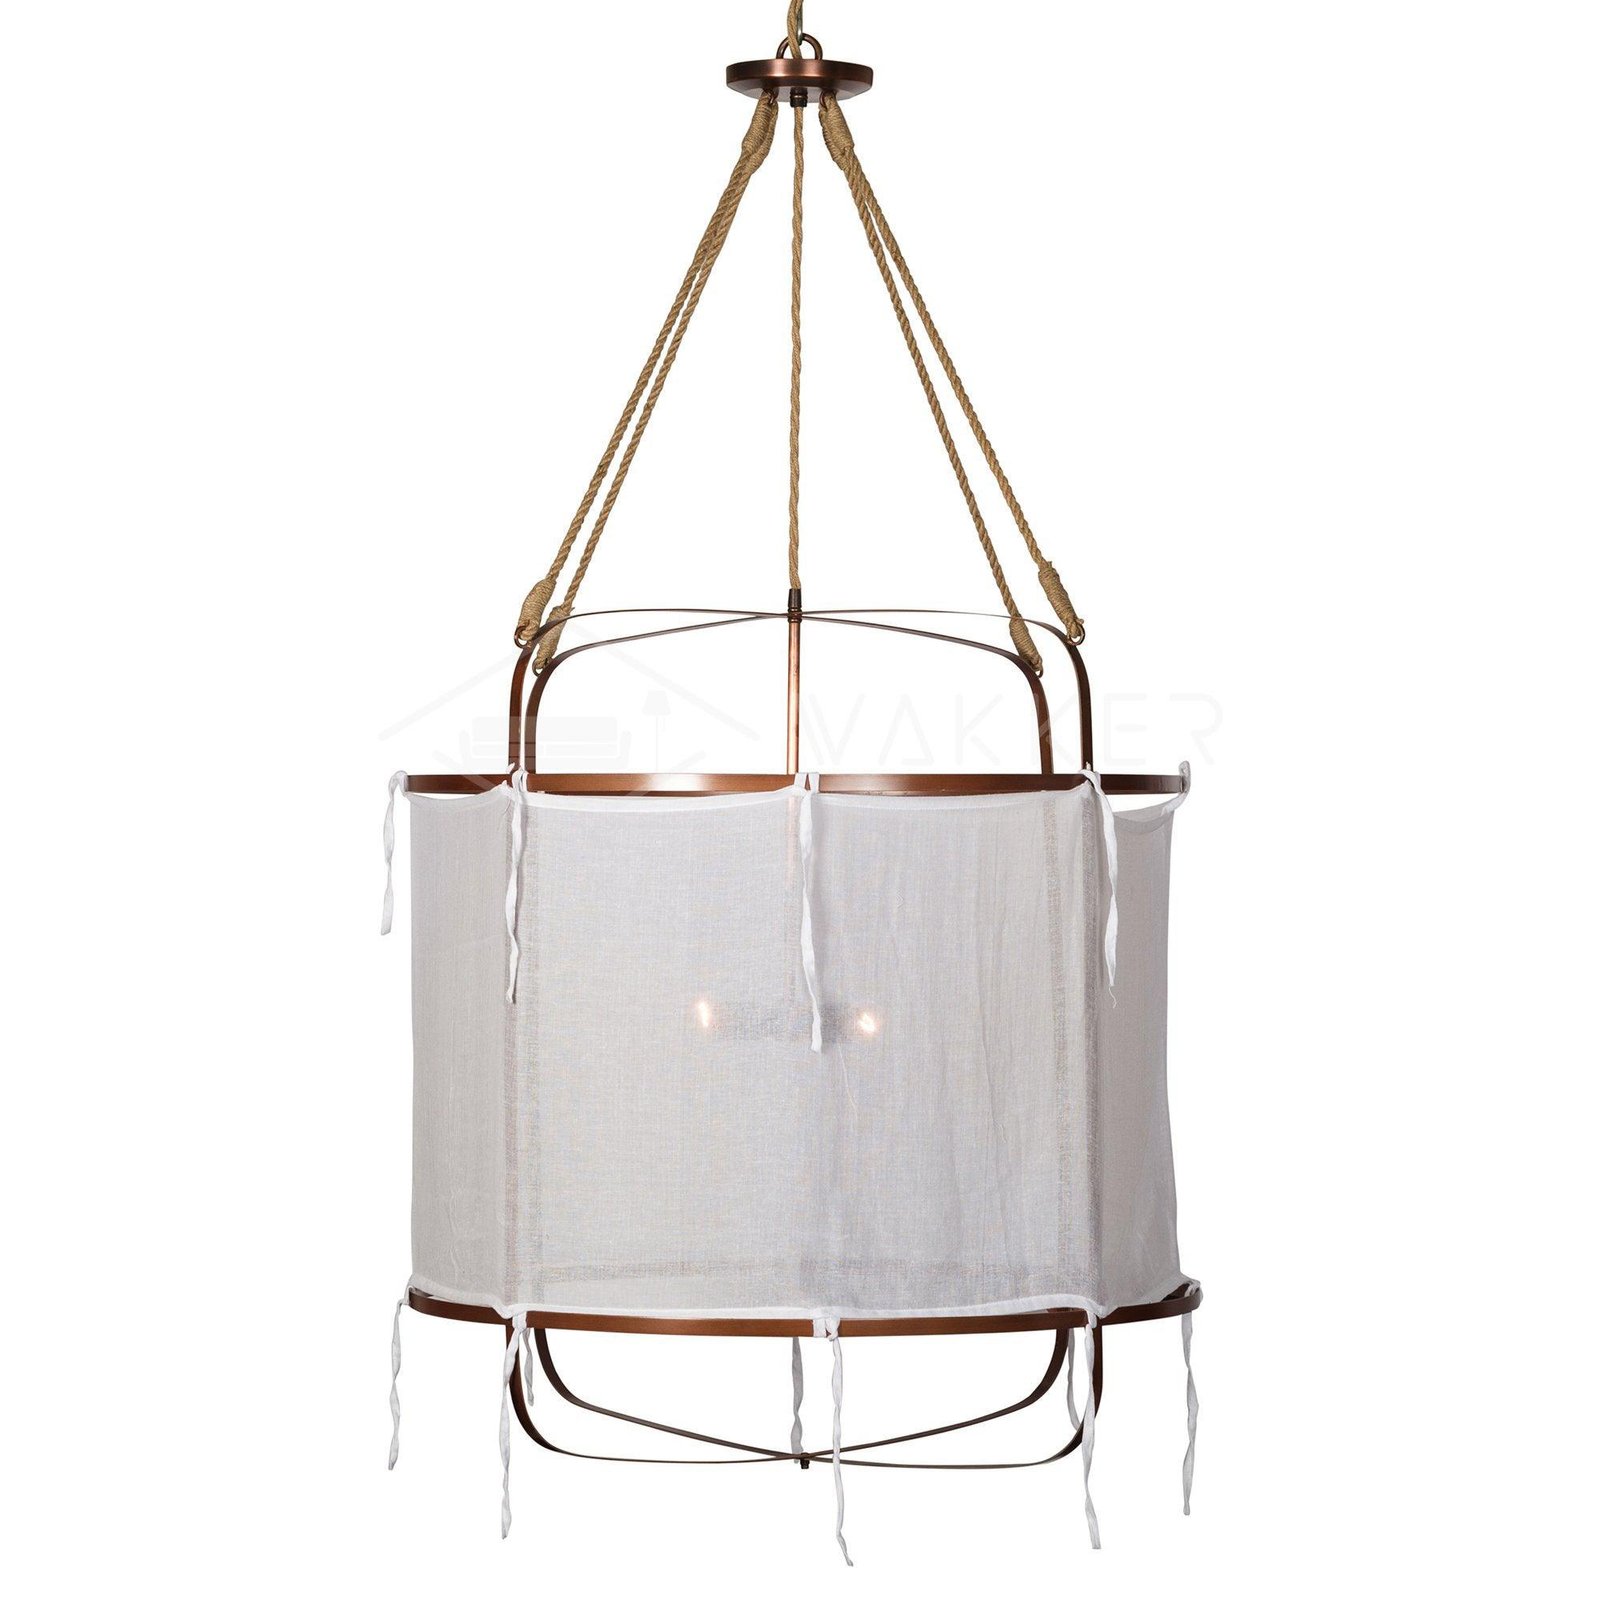 Linen Pendant Light in Provence Style, Copper or White, with Diameter of 15.7 inches and Height of 15.7 inches (40cm x 40cm)